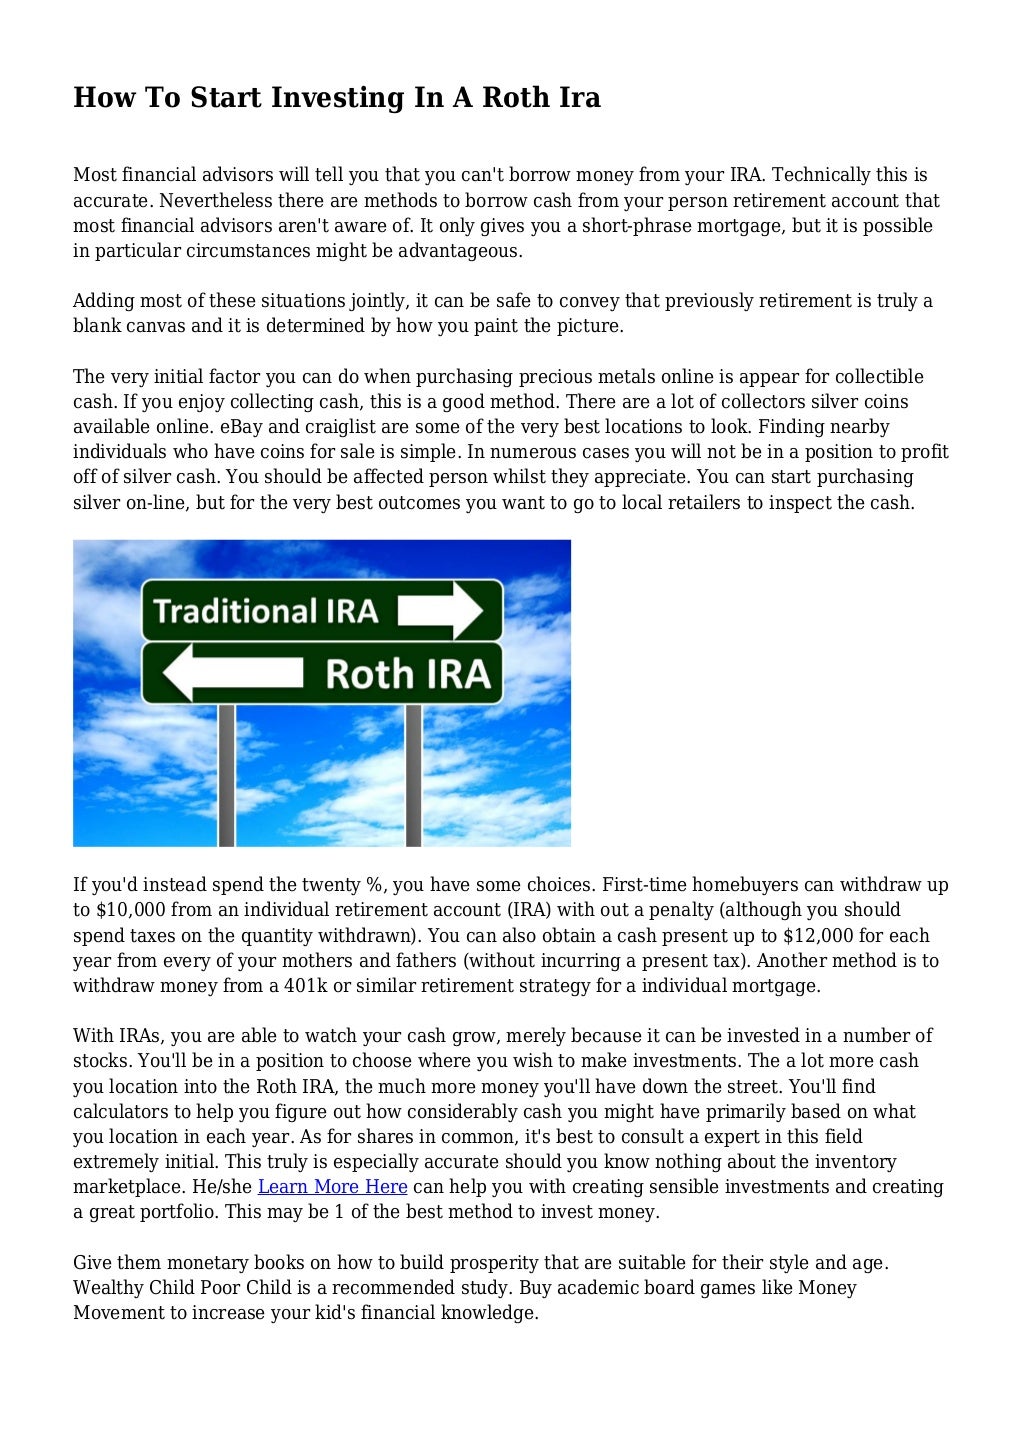 How To Start Investing In A Roth Ira